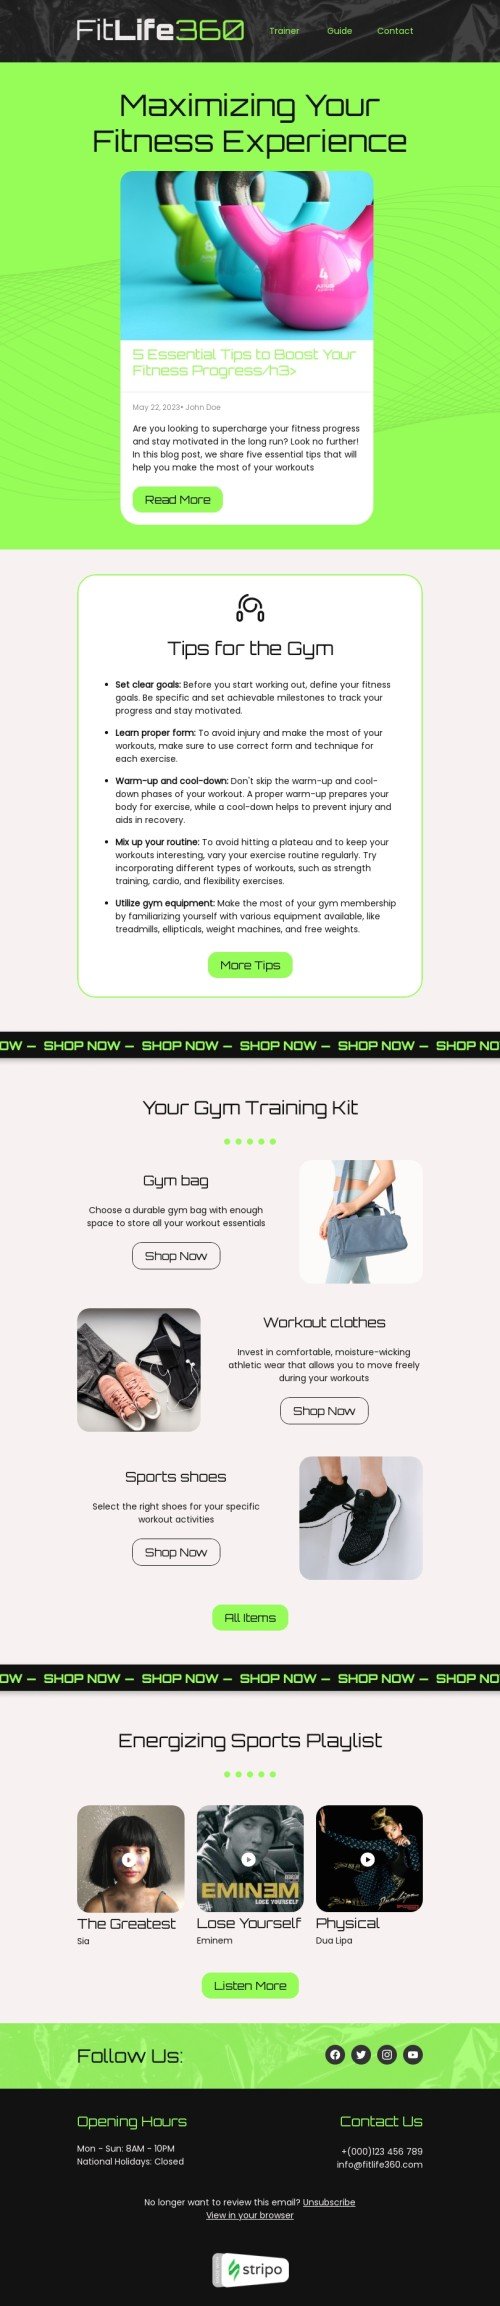 Email digest email template "Client assistance" for health and wellness industry mobile view